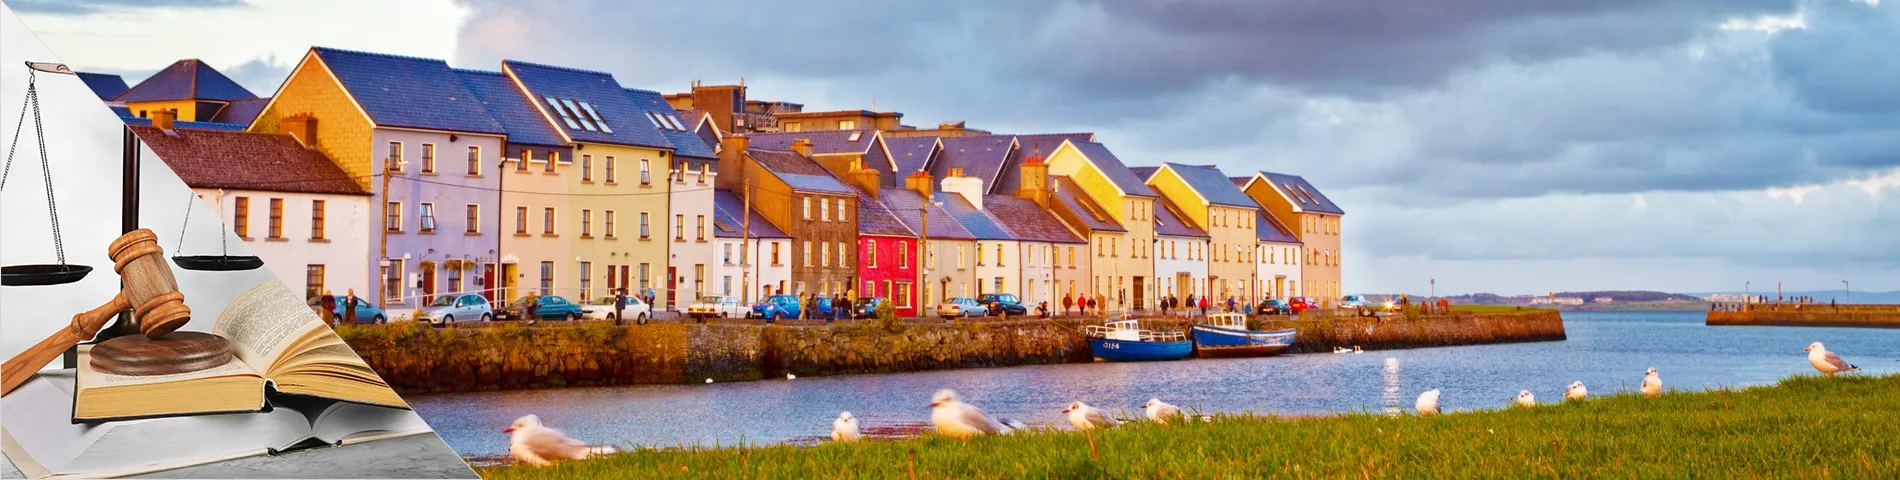 Galway - Anglais juridique